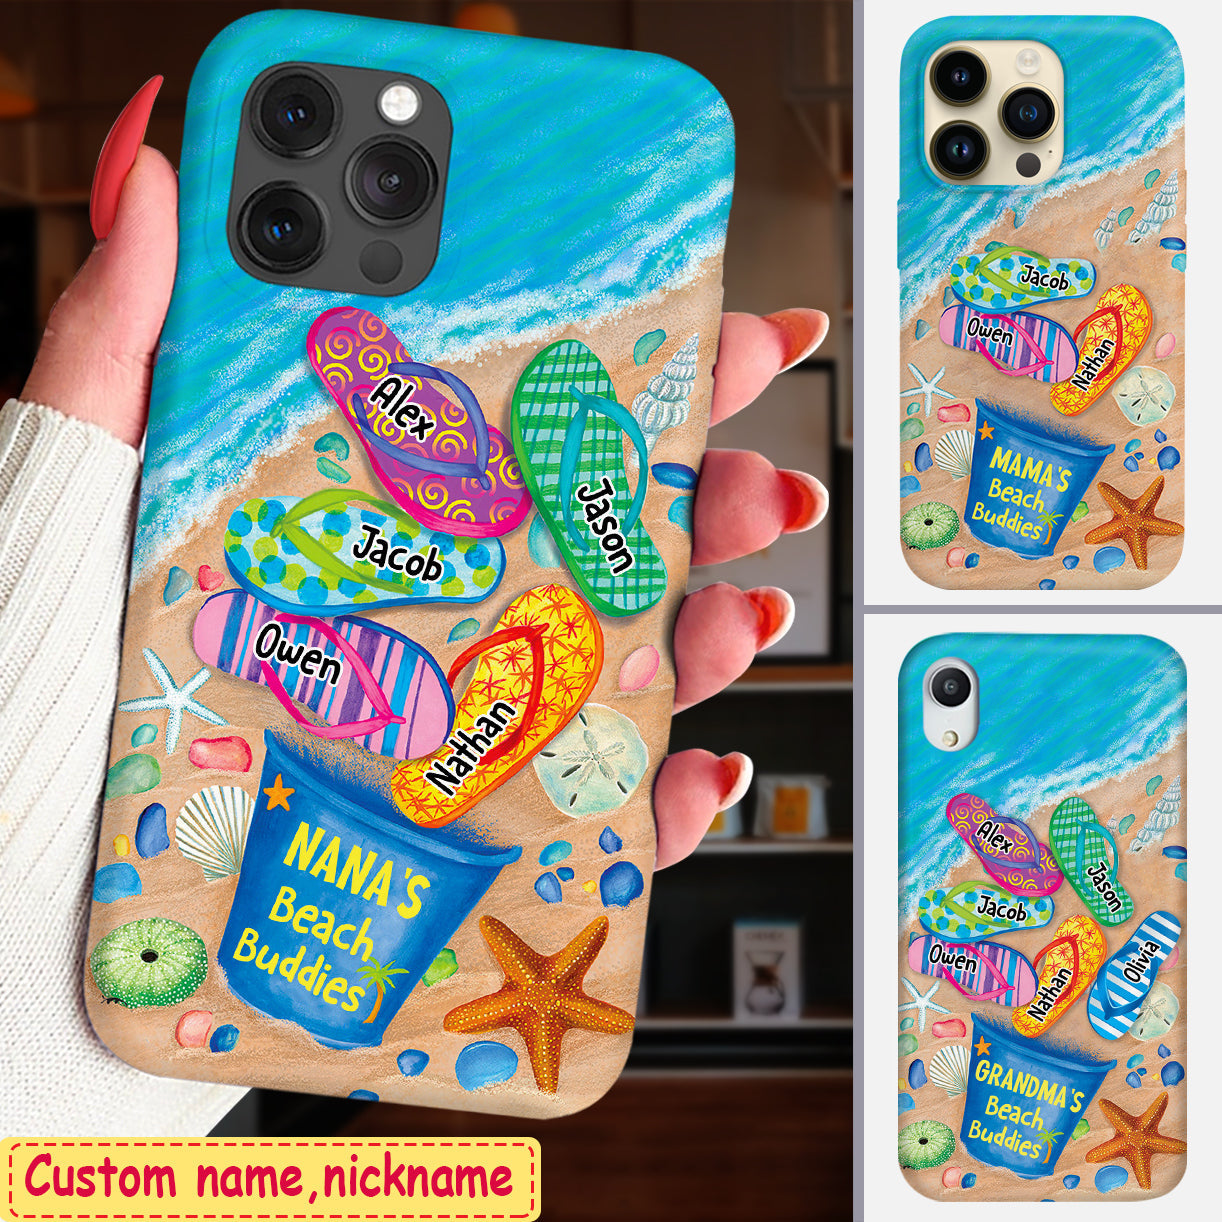 Personalized Nana's Beach Buddies Summer Flip Flop Phone case Perfect Gift for Grandmas Moms Aunties